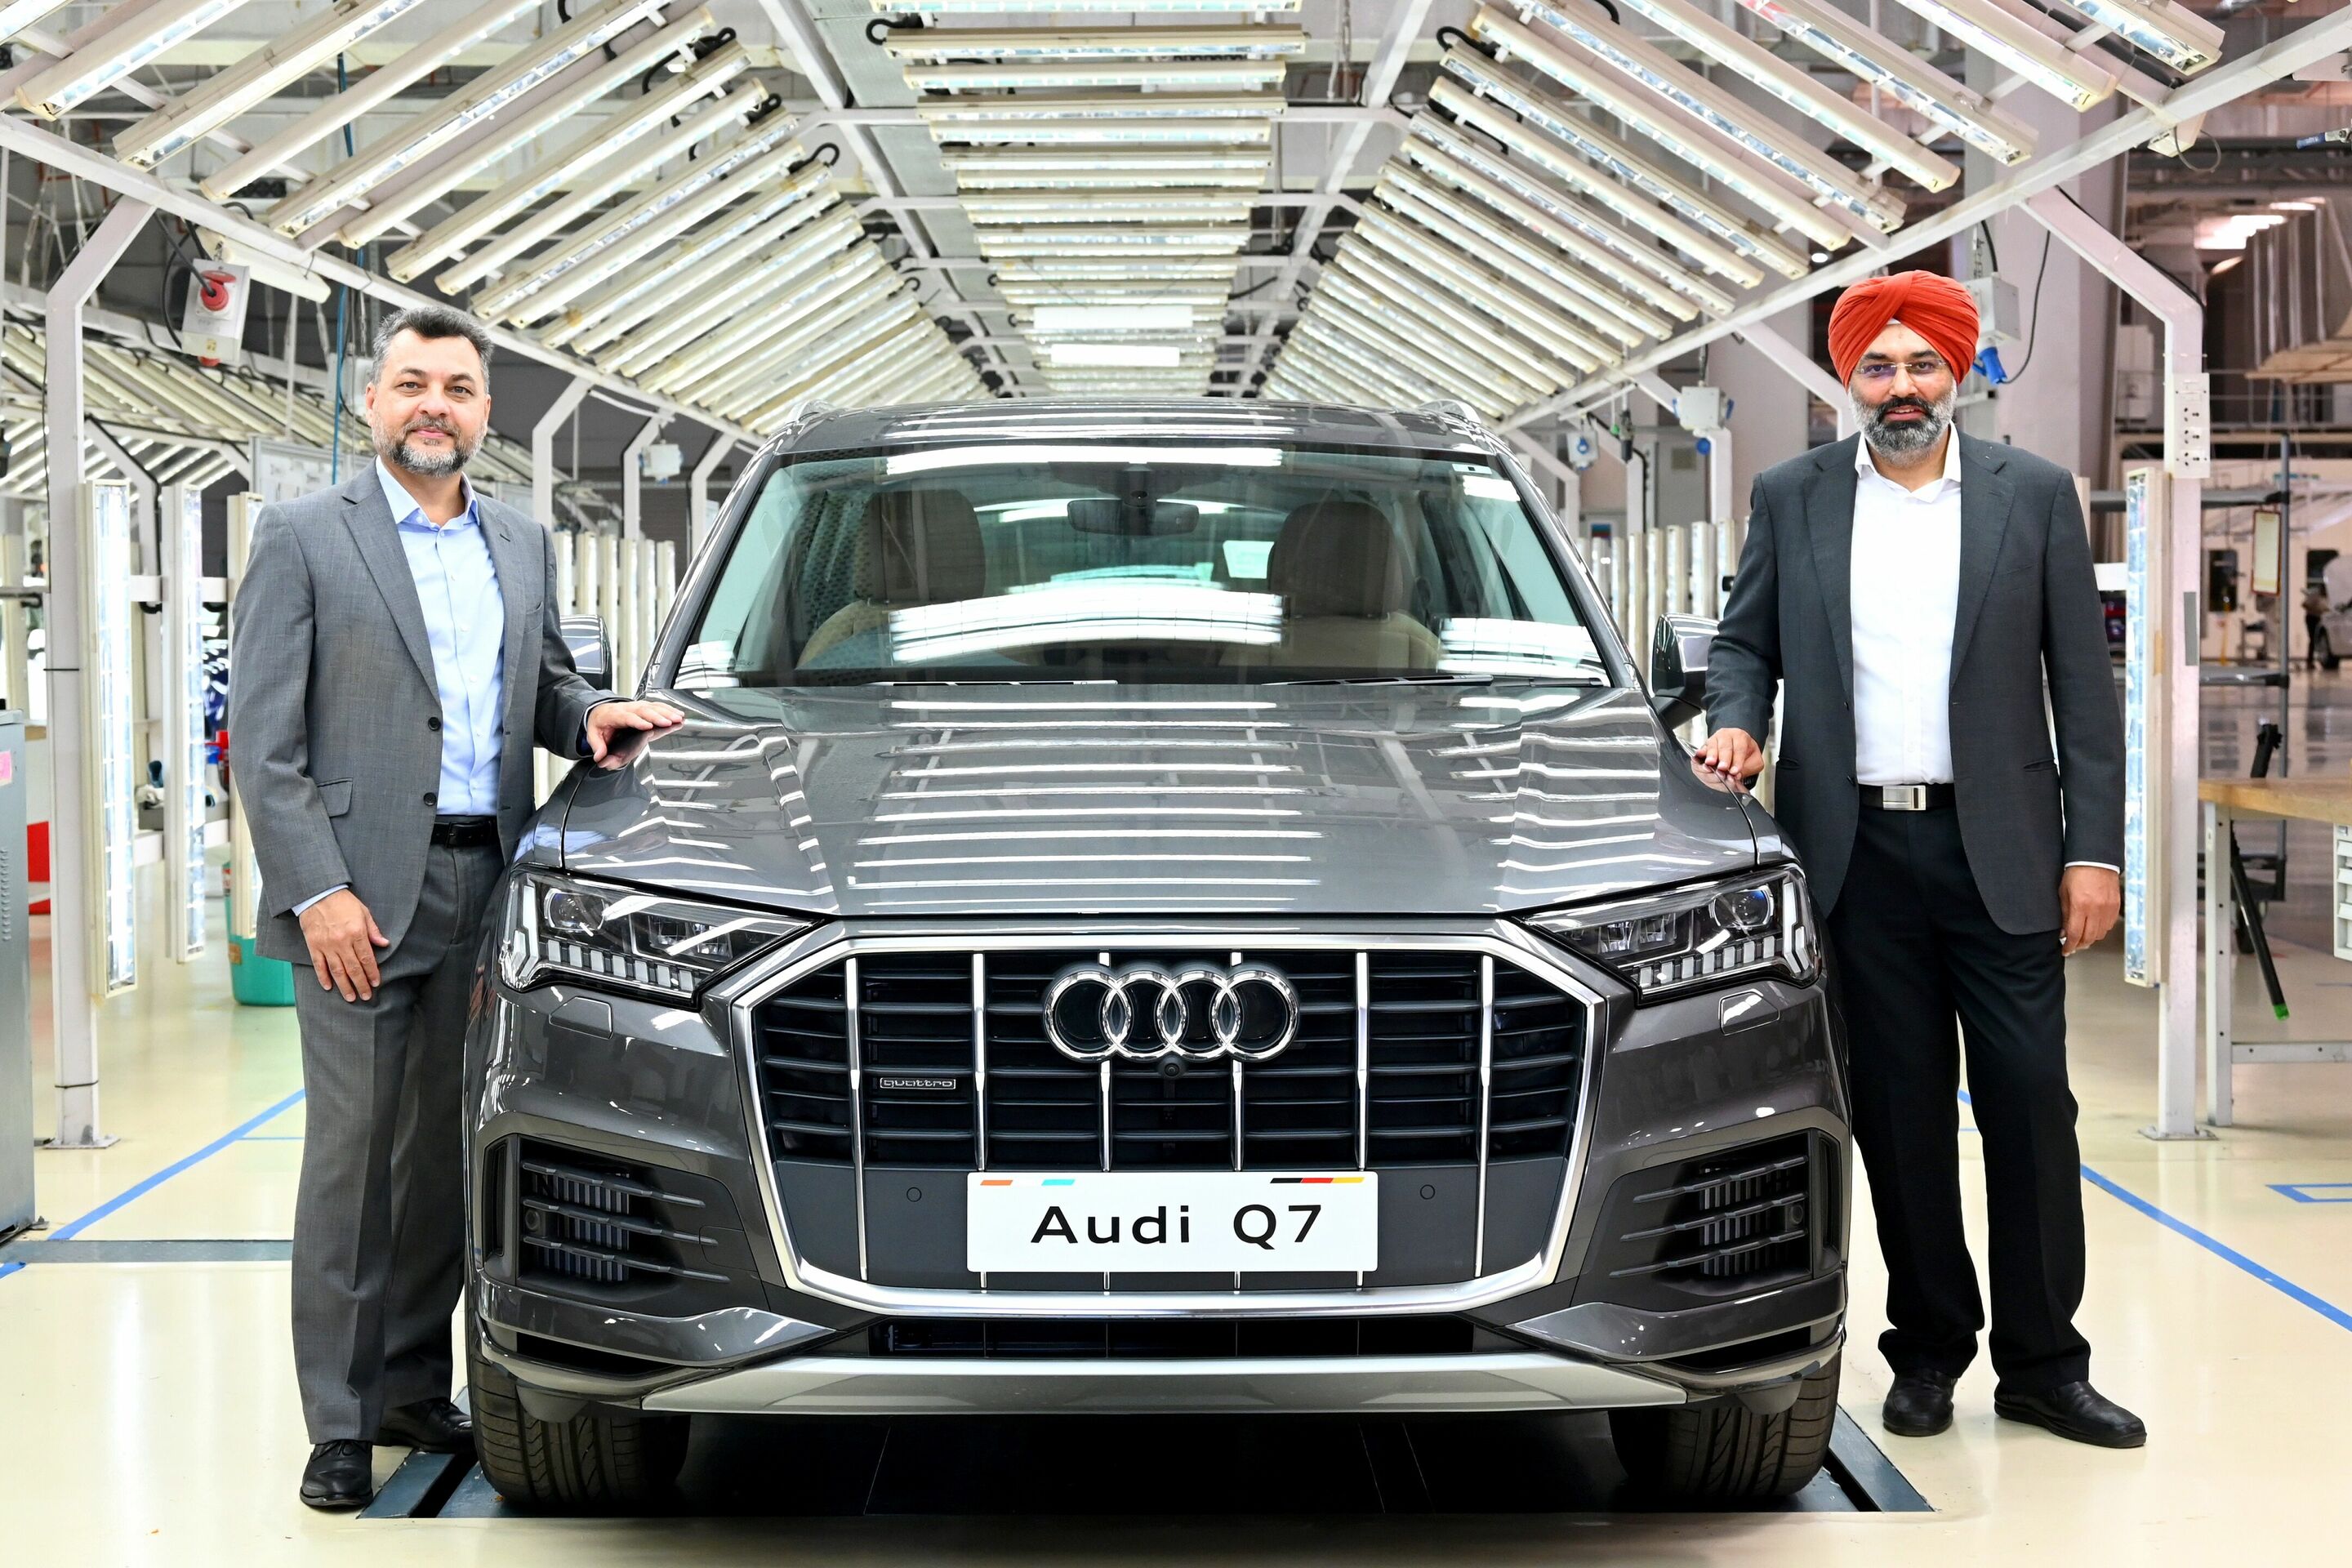 Audi India beings local production of the Audi Q7 at the SAVWIPL plant in Aurangabad.